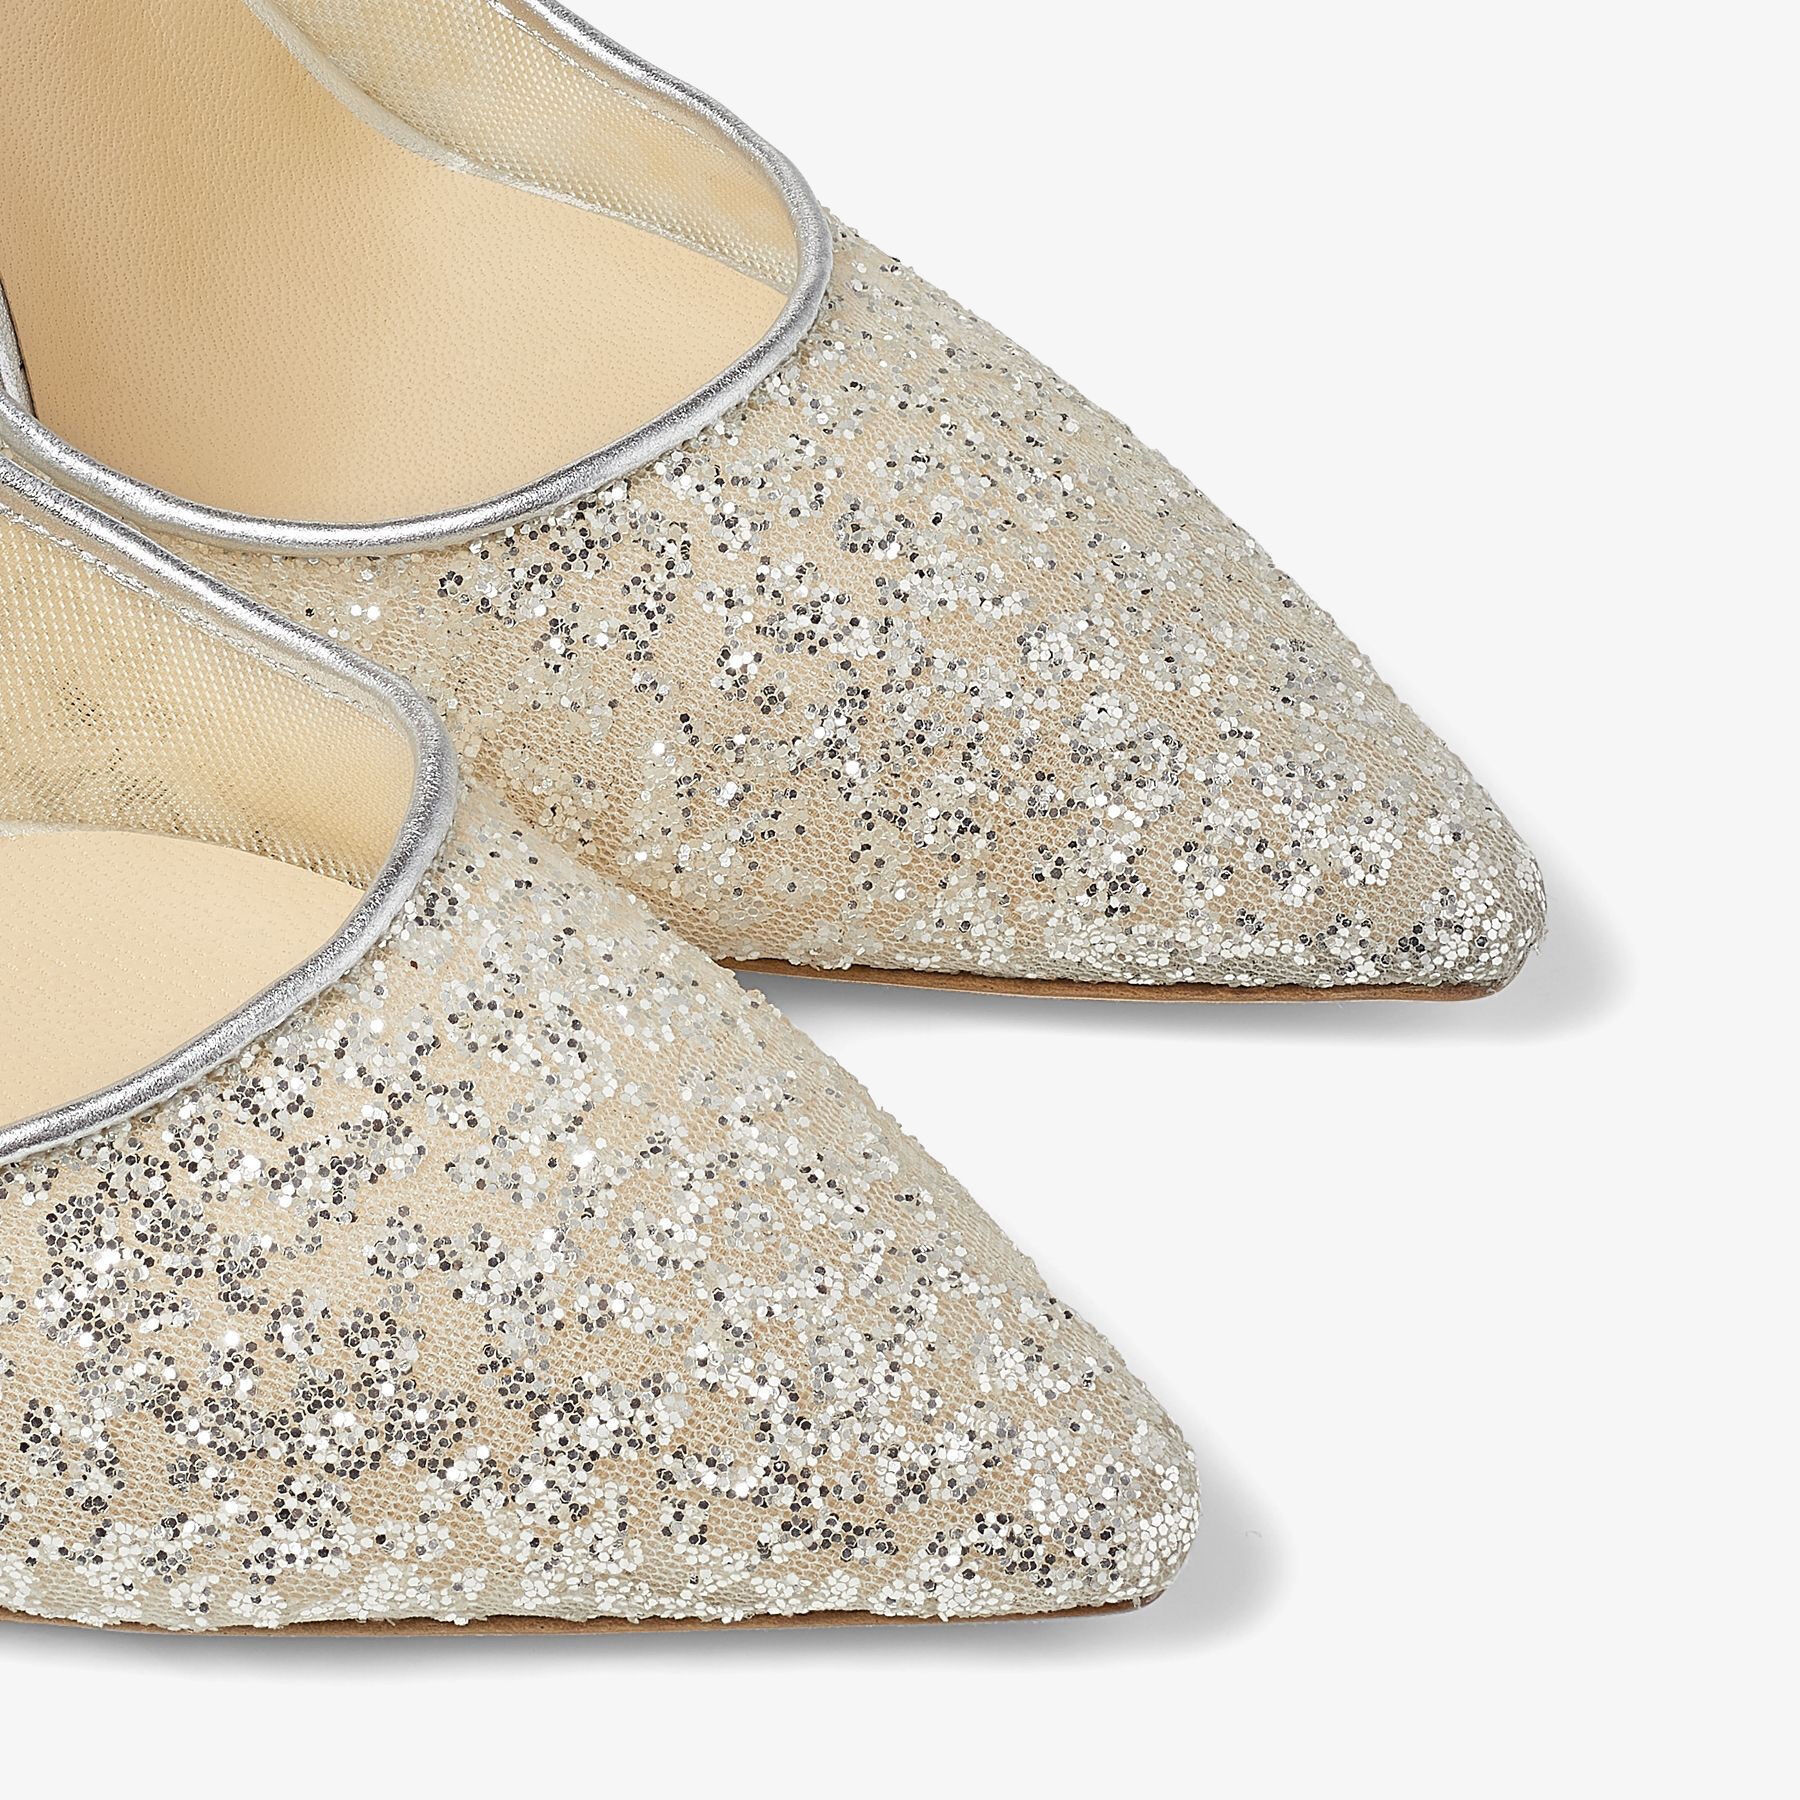 JIMMY CHOO Romy 85 Silver Glitter Tulle and Metallic Nappa Pointy 